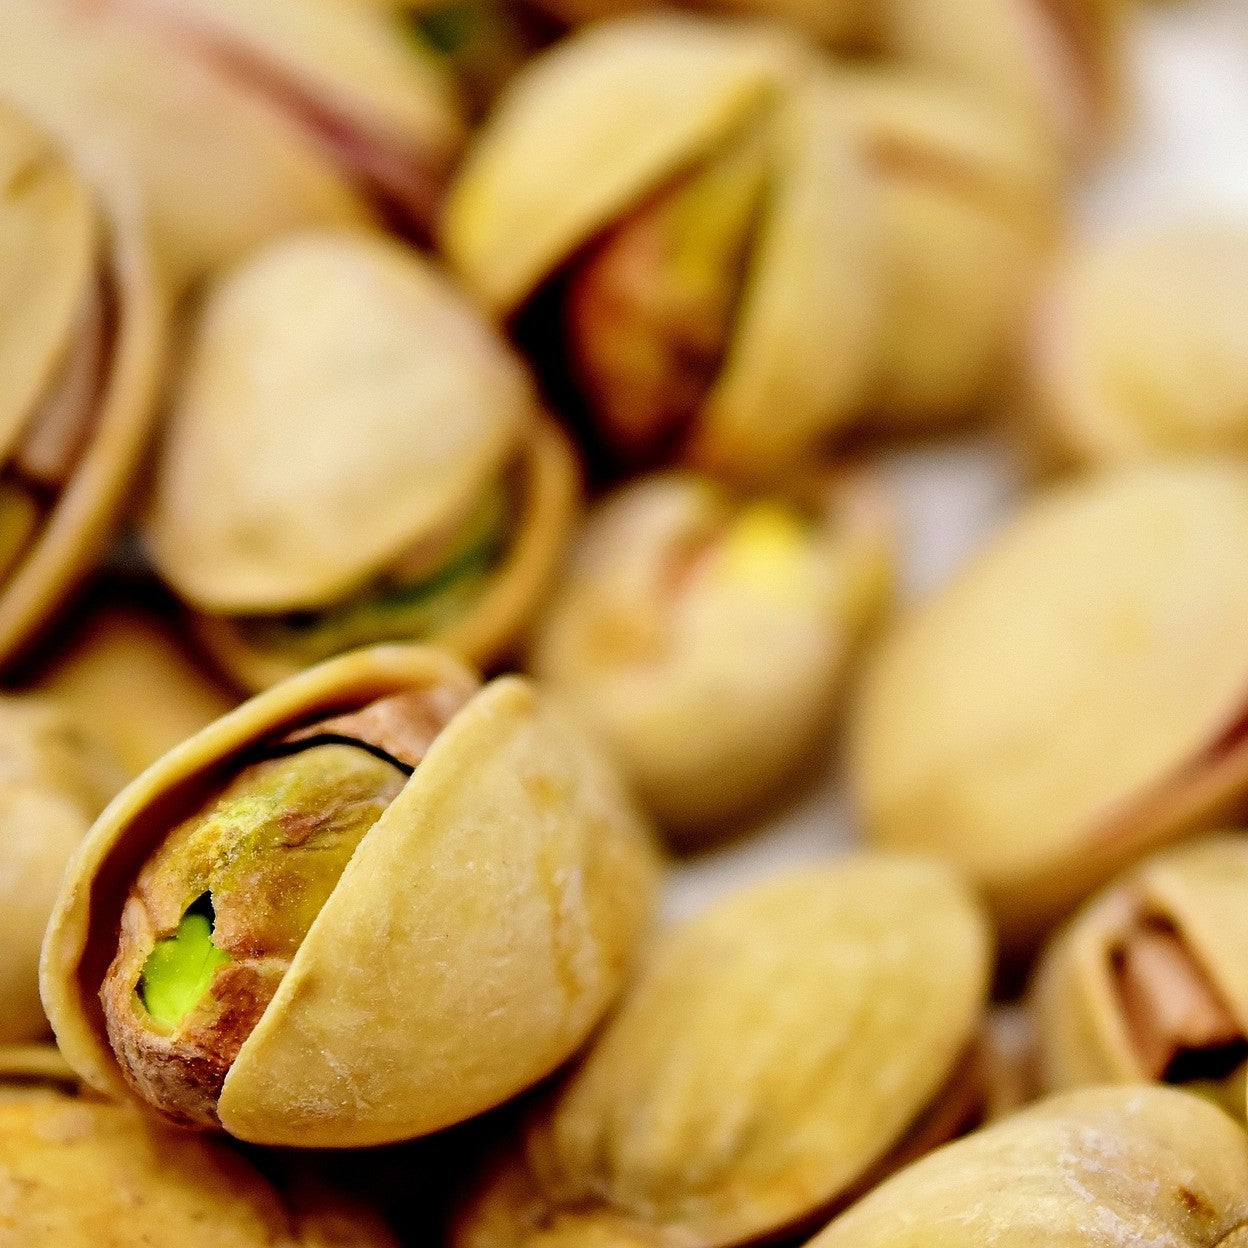 What are the Health Benefits of Pistachios?